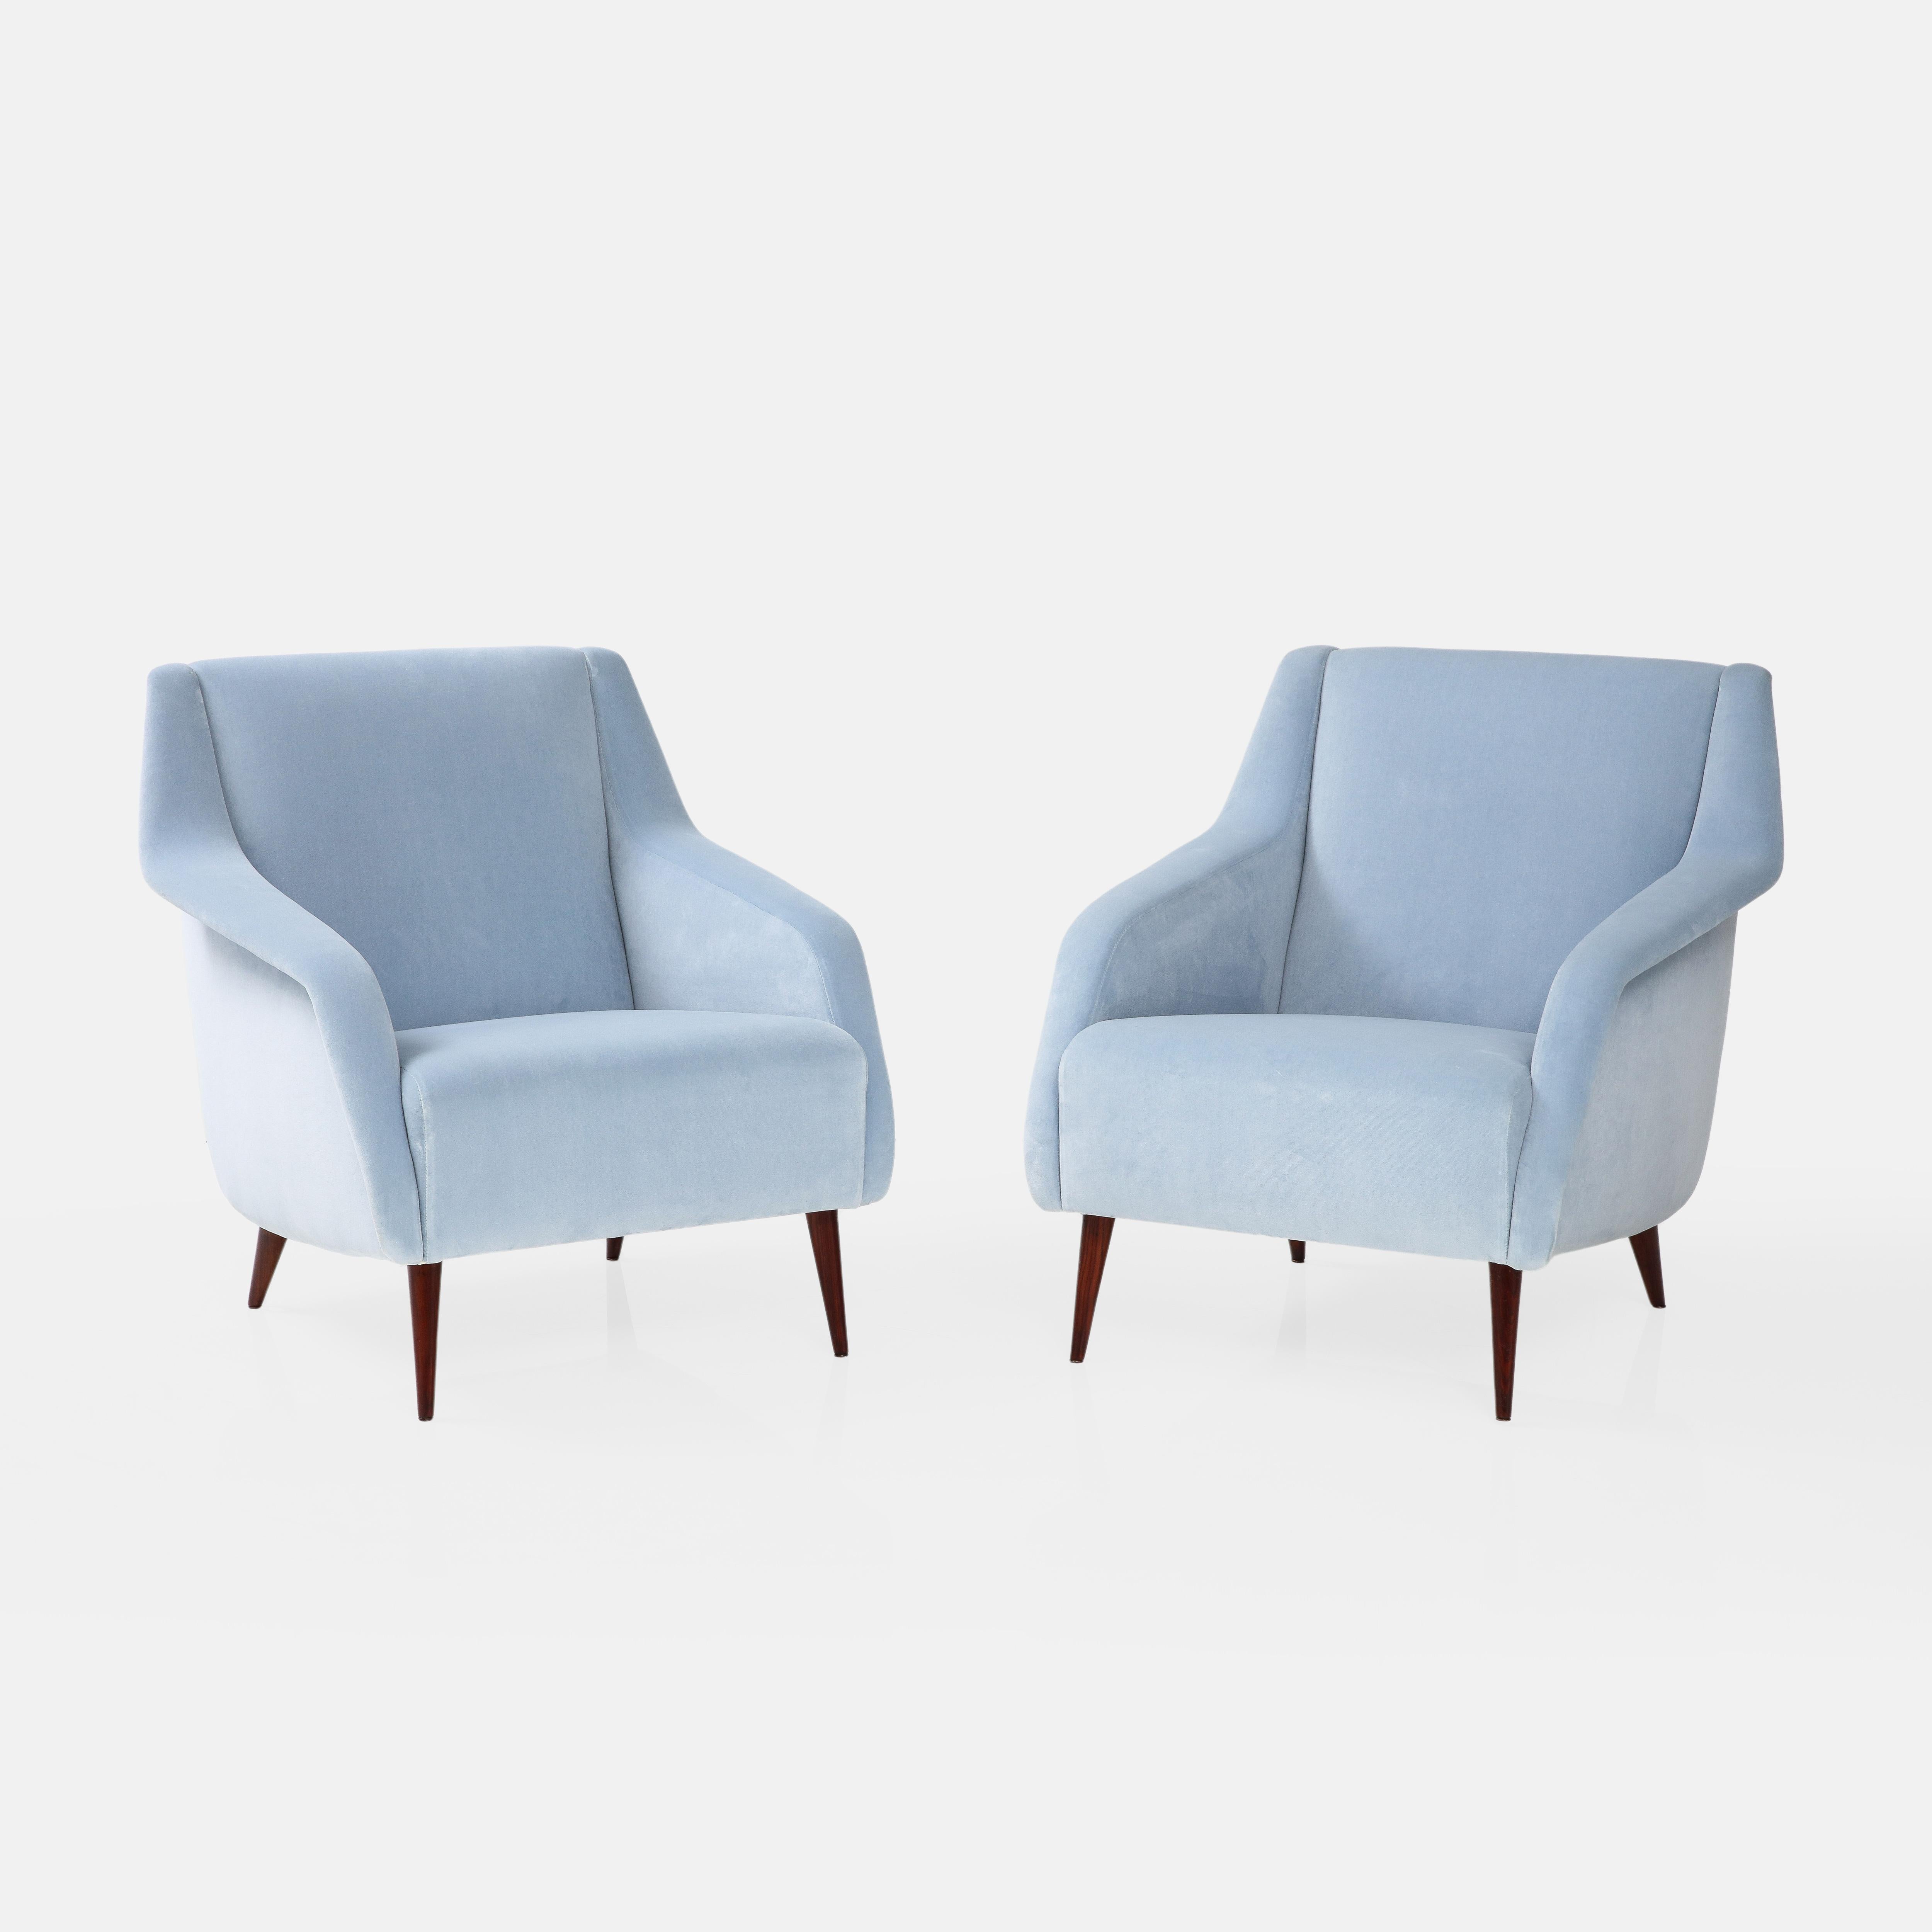 Carlo De Carli for Cassina pair of sculptural lounge chairs or armchairs in light blue velvet upholstery with stained wood legs. These armchairs are an iconic 1st edition Carlo De Carli design with sleek architectural lines and great proportions for